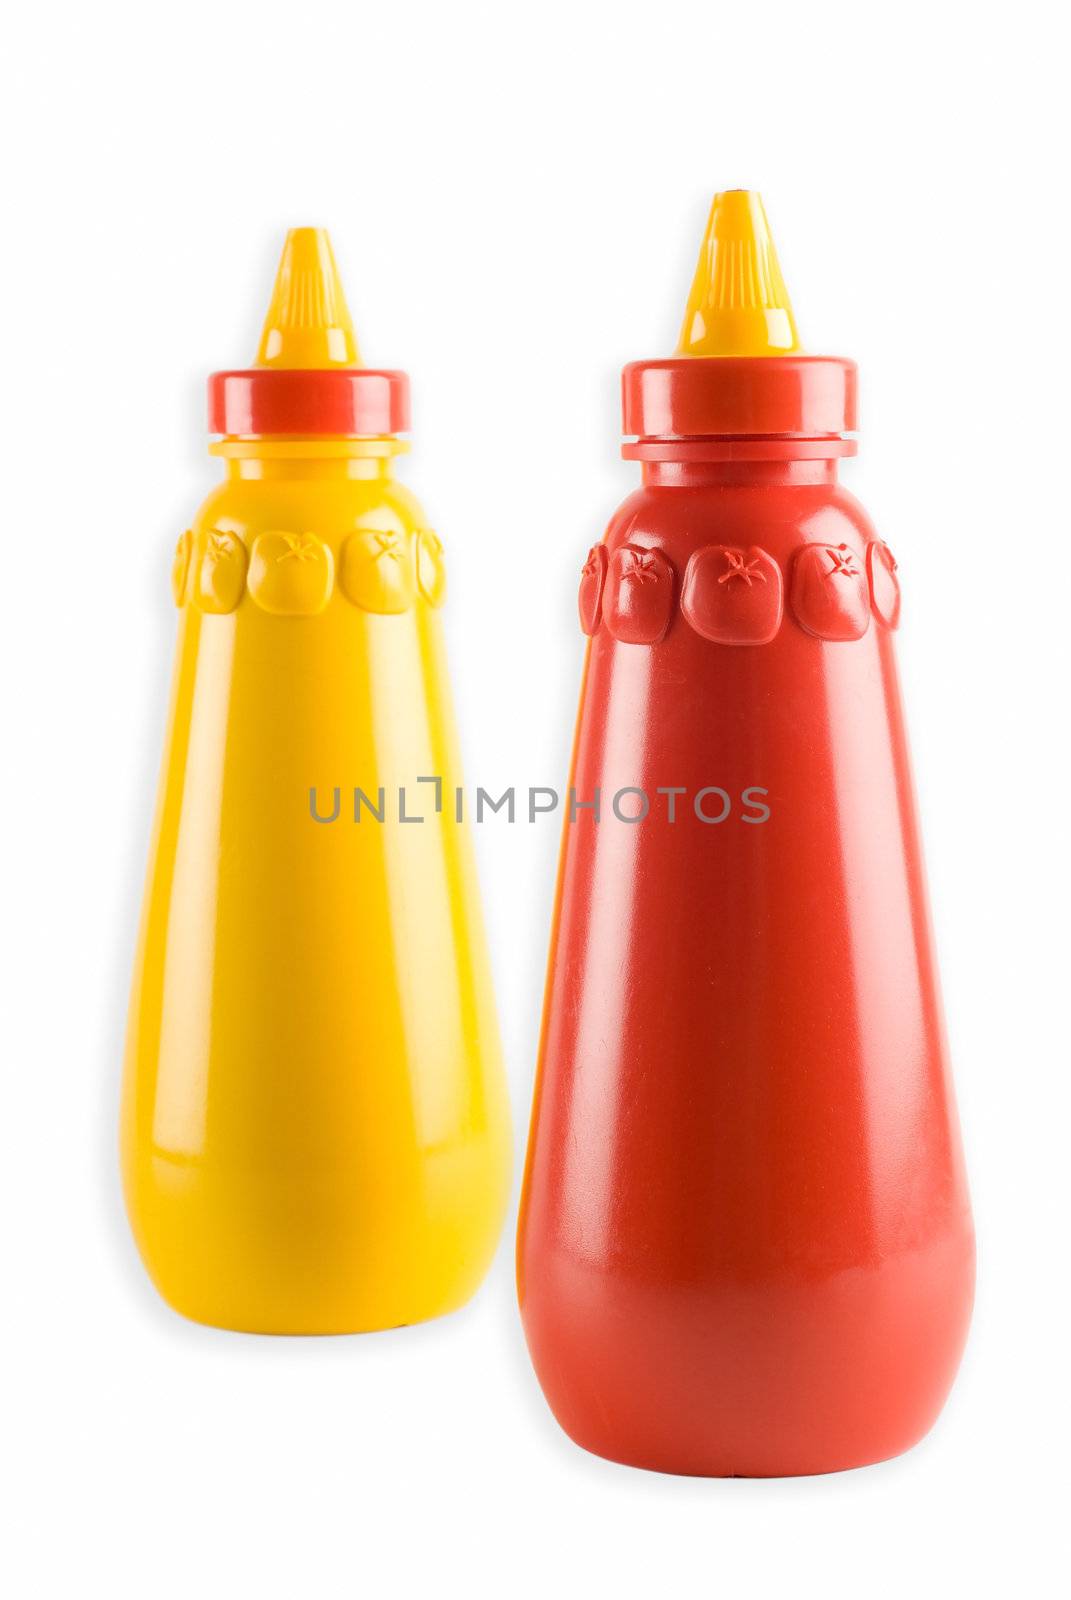 Tomato ketchup and mustard by alistaircotton